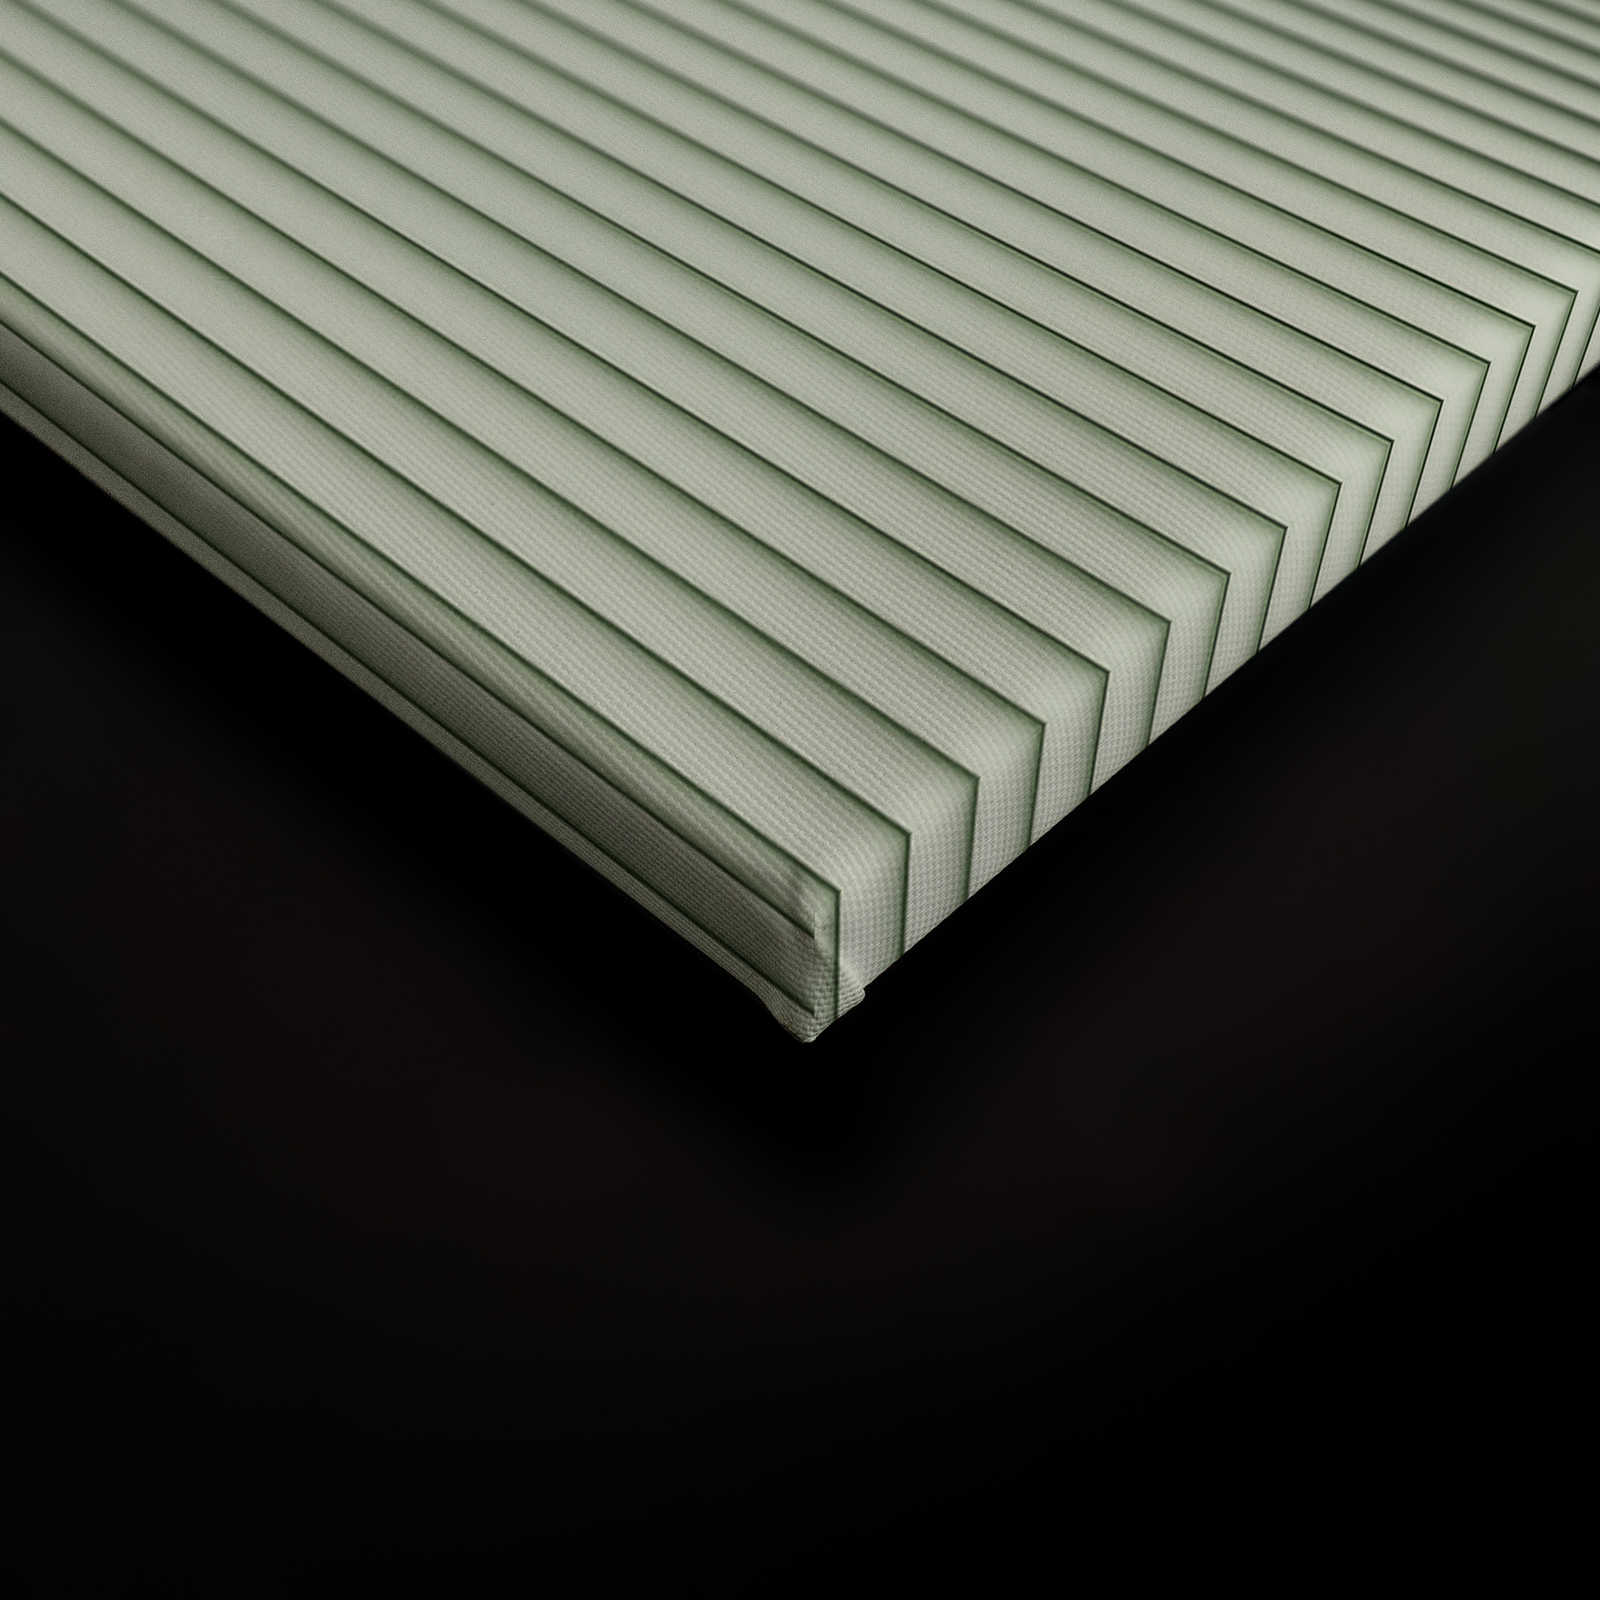             Magic Wall 2 - Green stripes canvas picture with 3D illusion effect - 1,20 m x 0,80 m
        